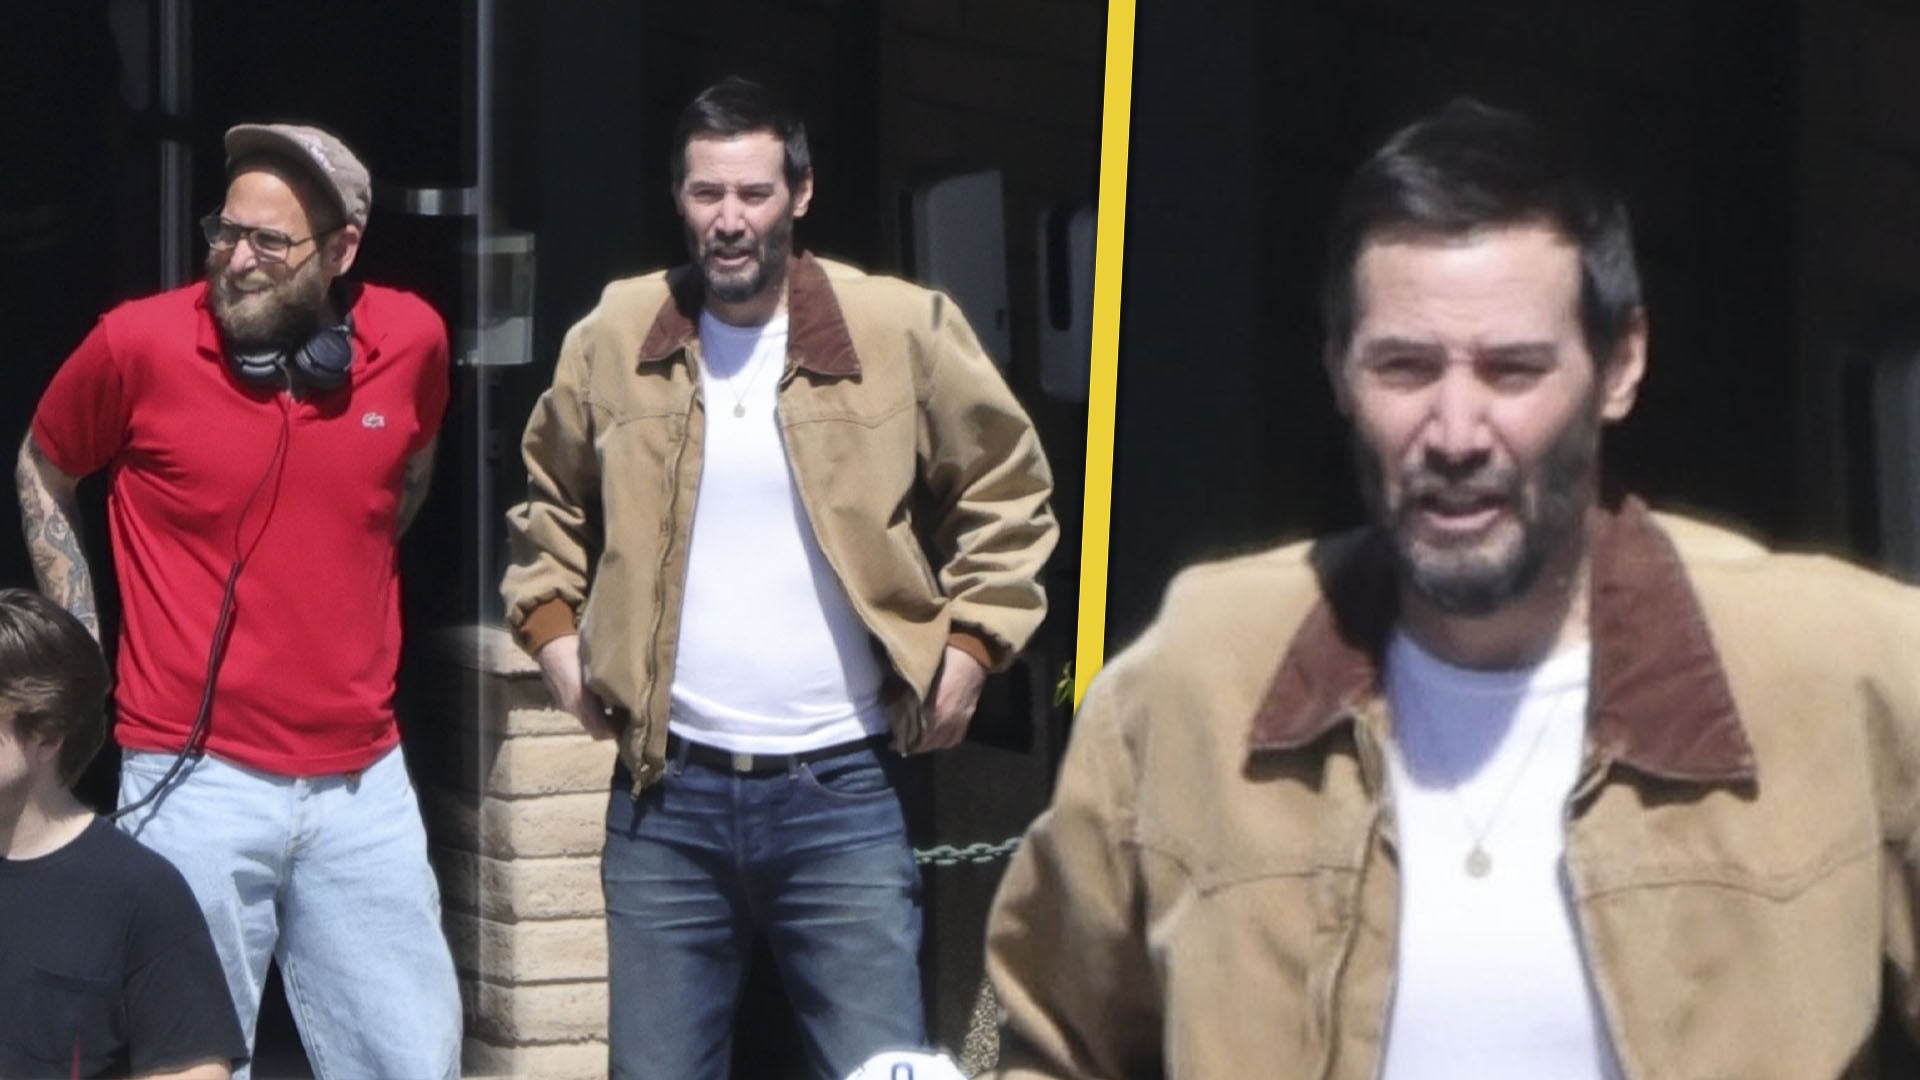 Keanu Reeves Shows Off Drastic Hair Change While Filming With Jonah Hill